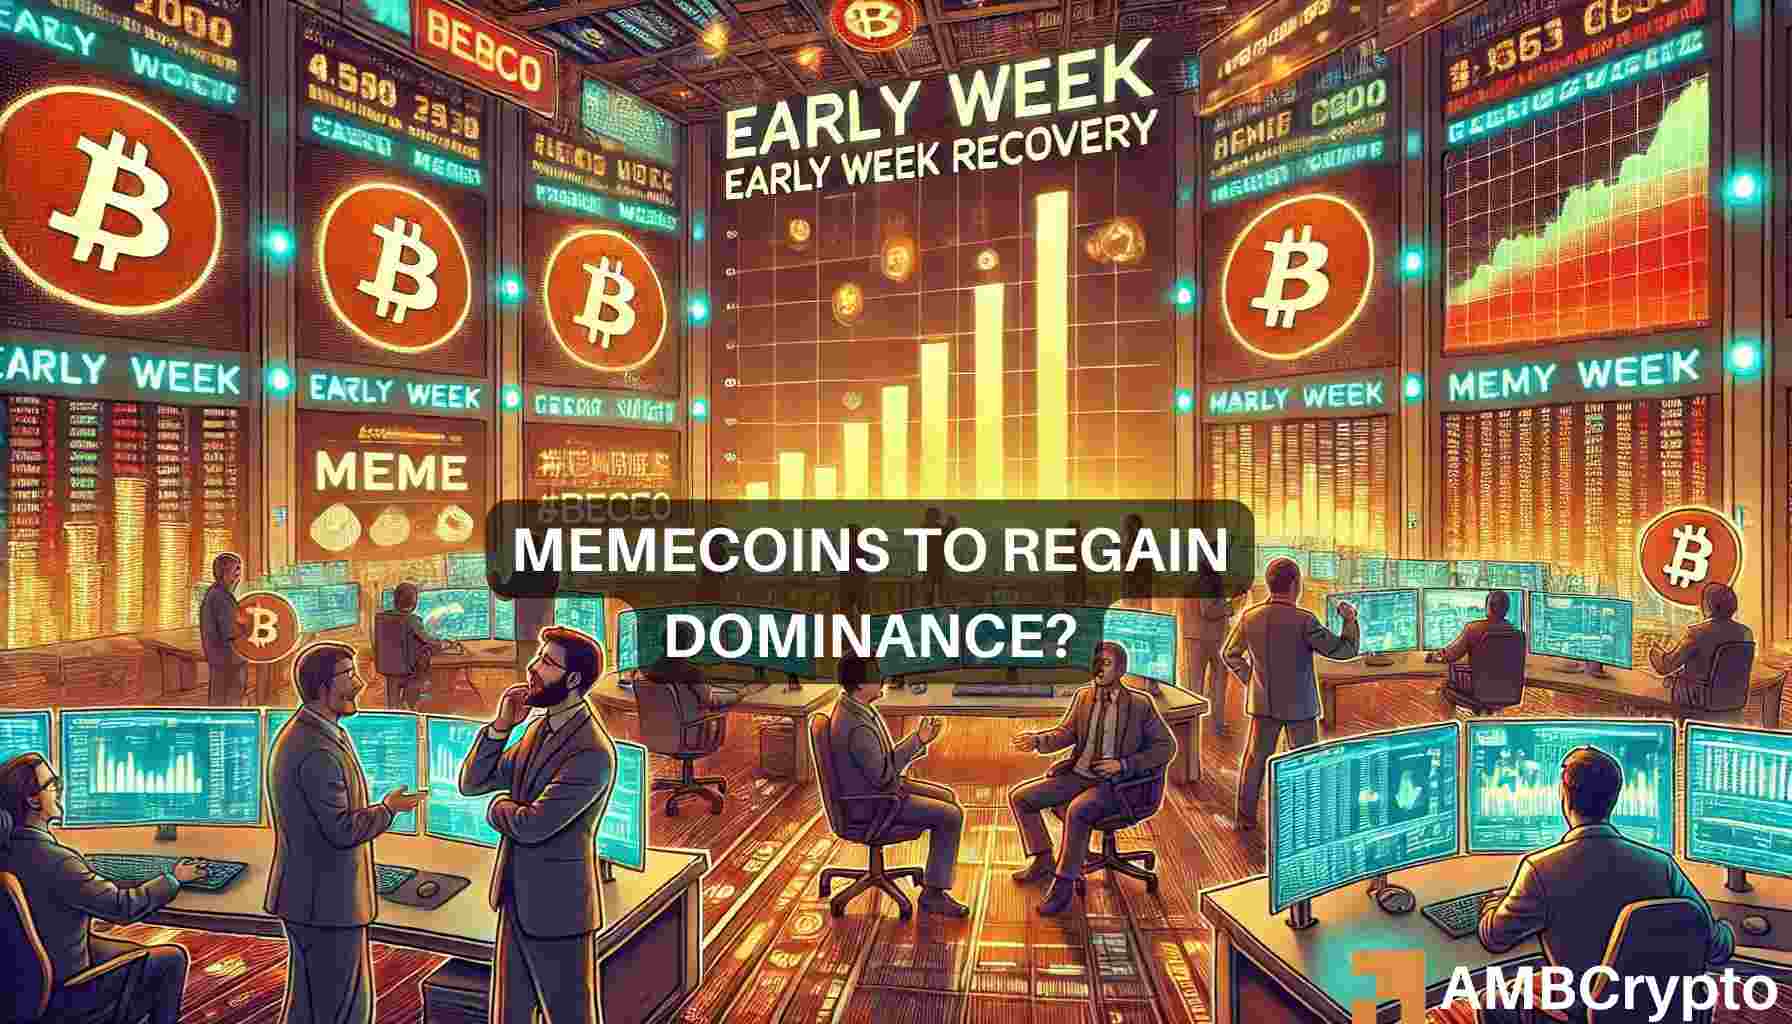 'Memecoins, AI will dominate': Is the crypto market changing?